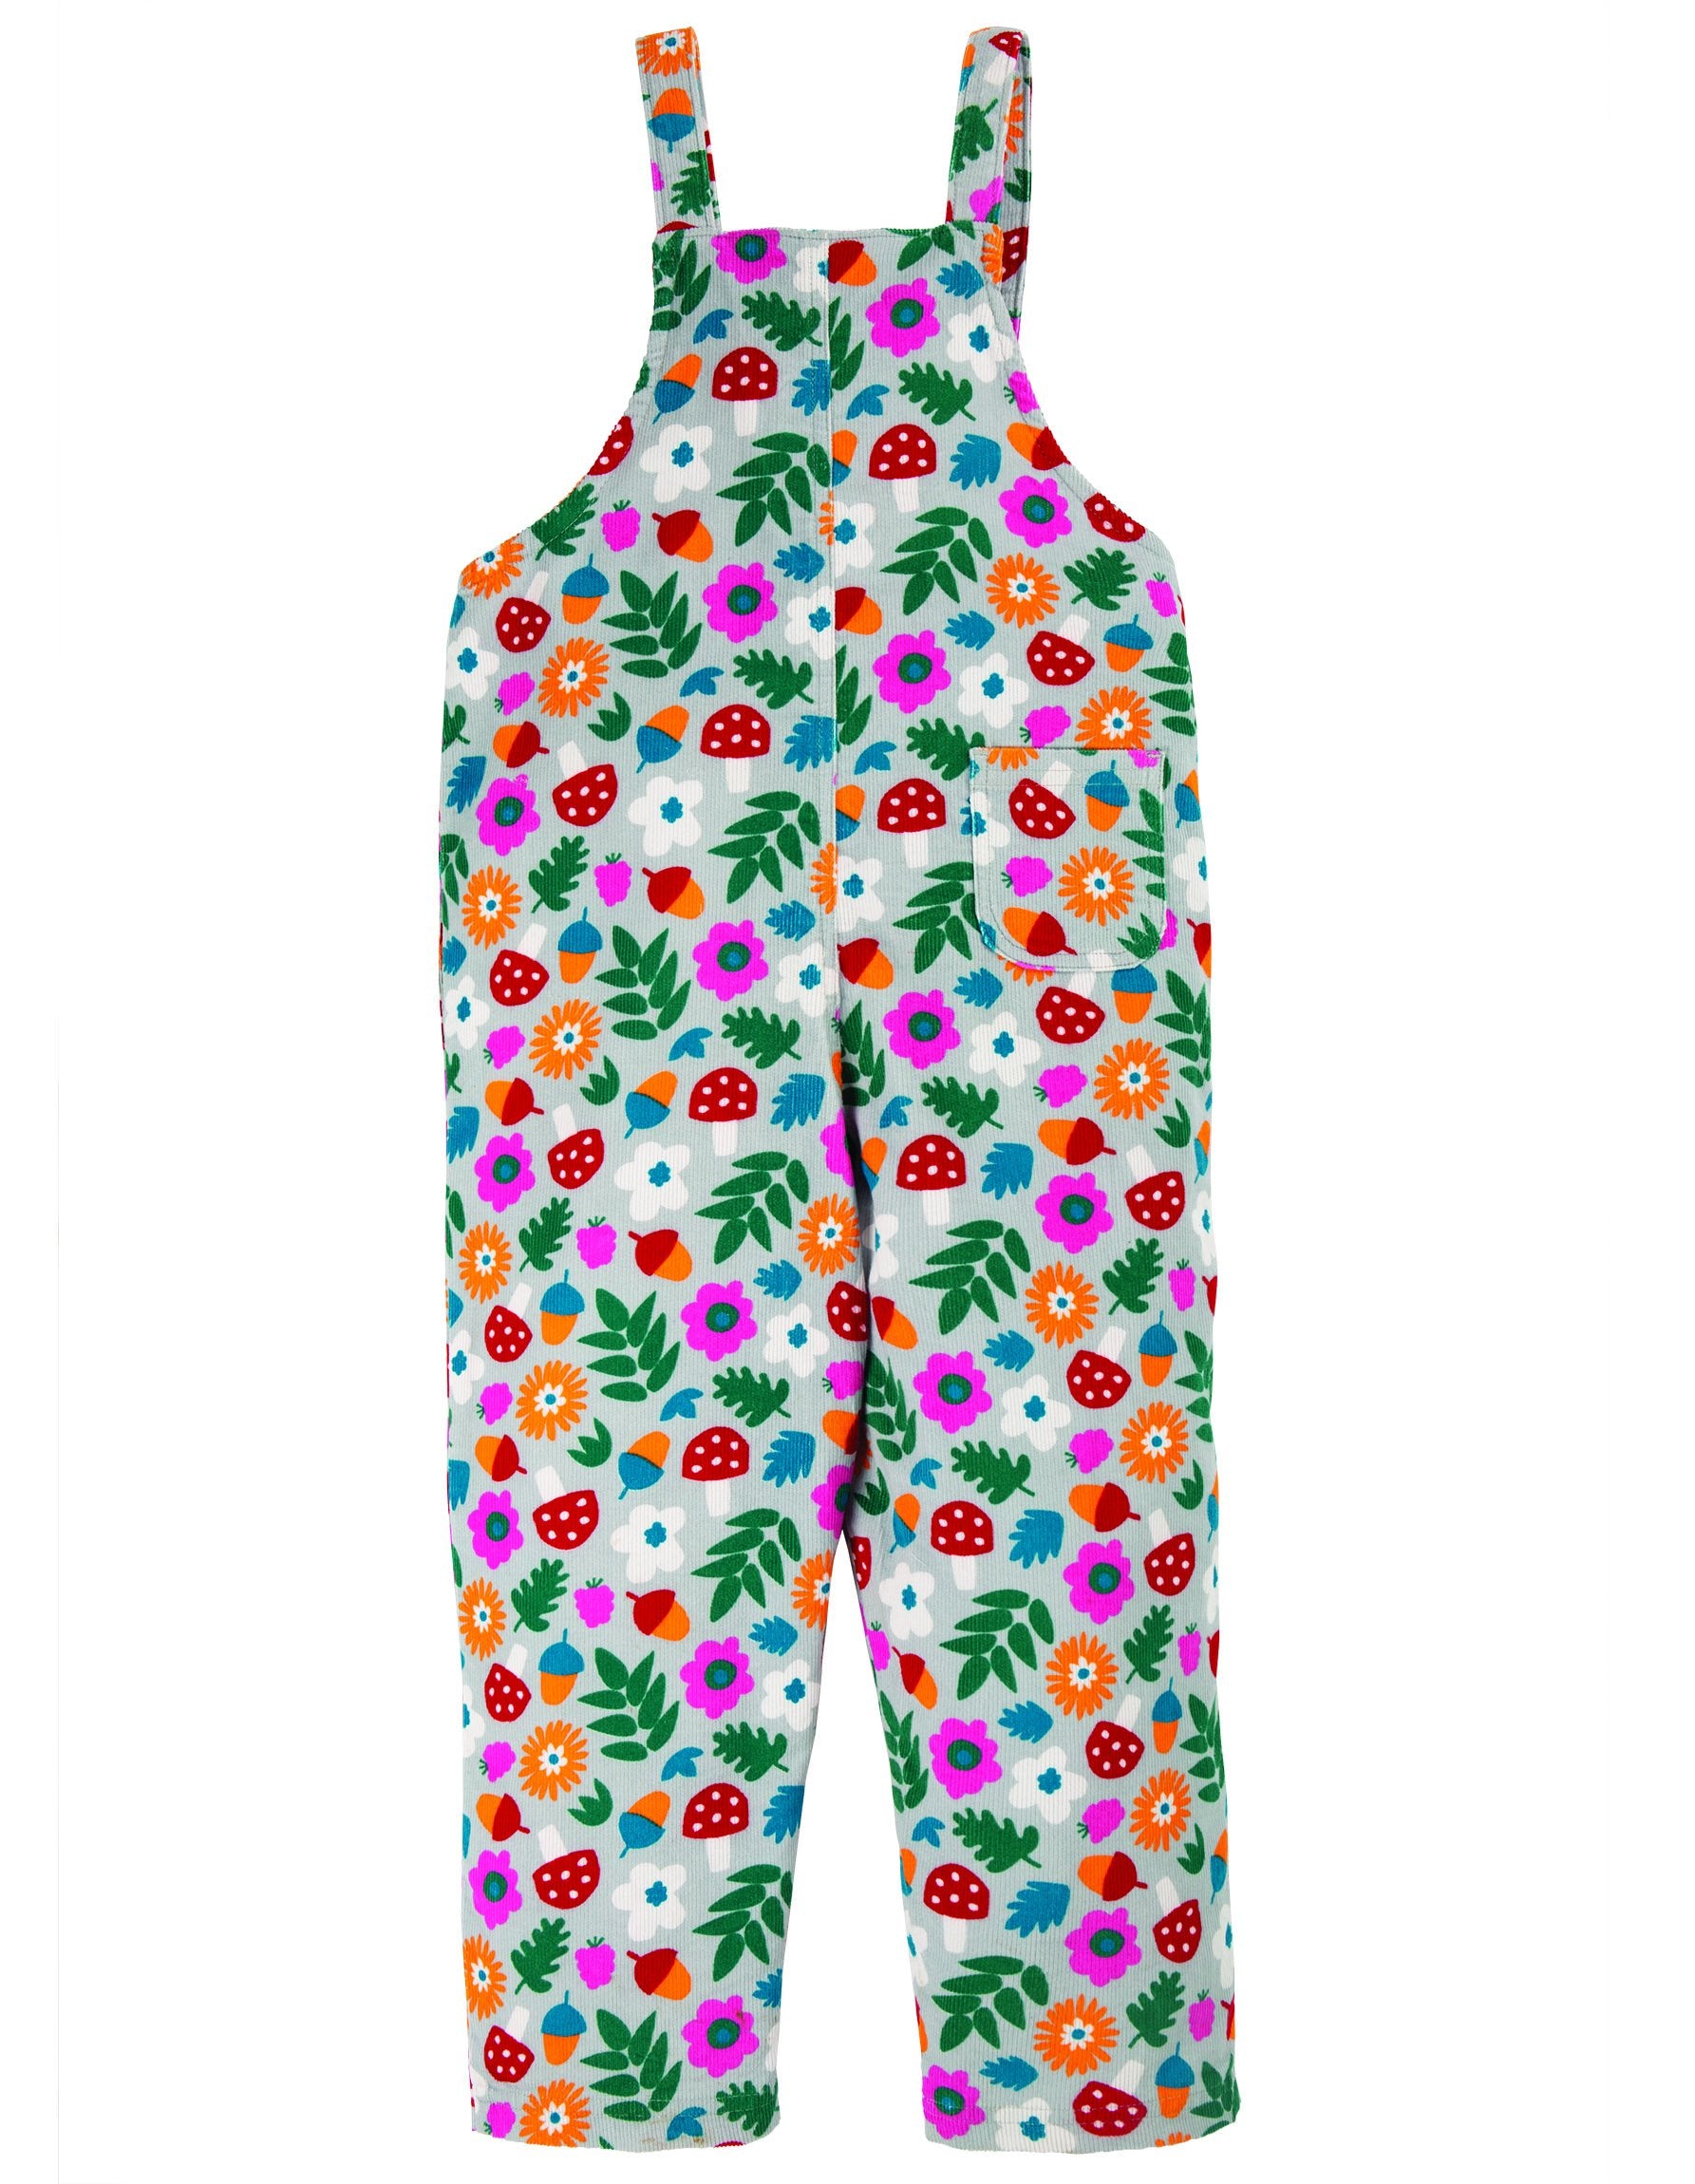 New Release Frugi Neptune Cord Dungaree Tin Roof Lost Words - The Thrifty Stork